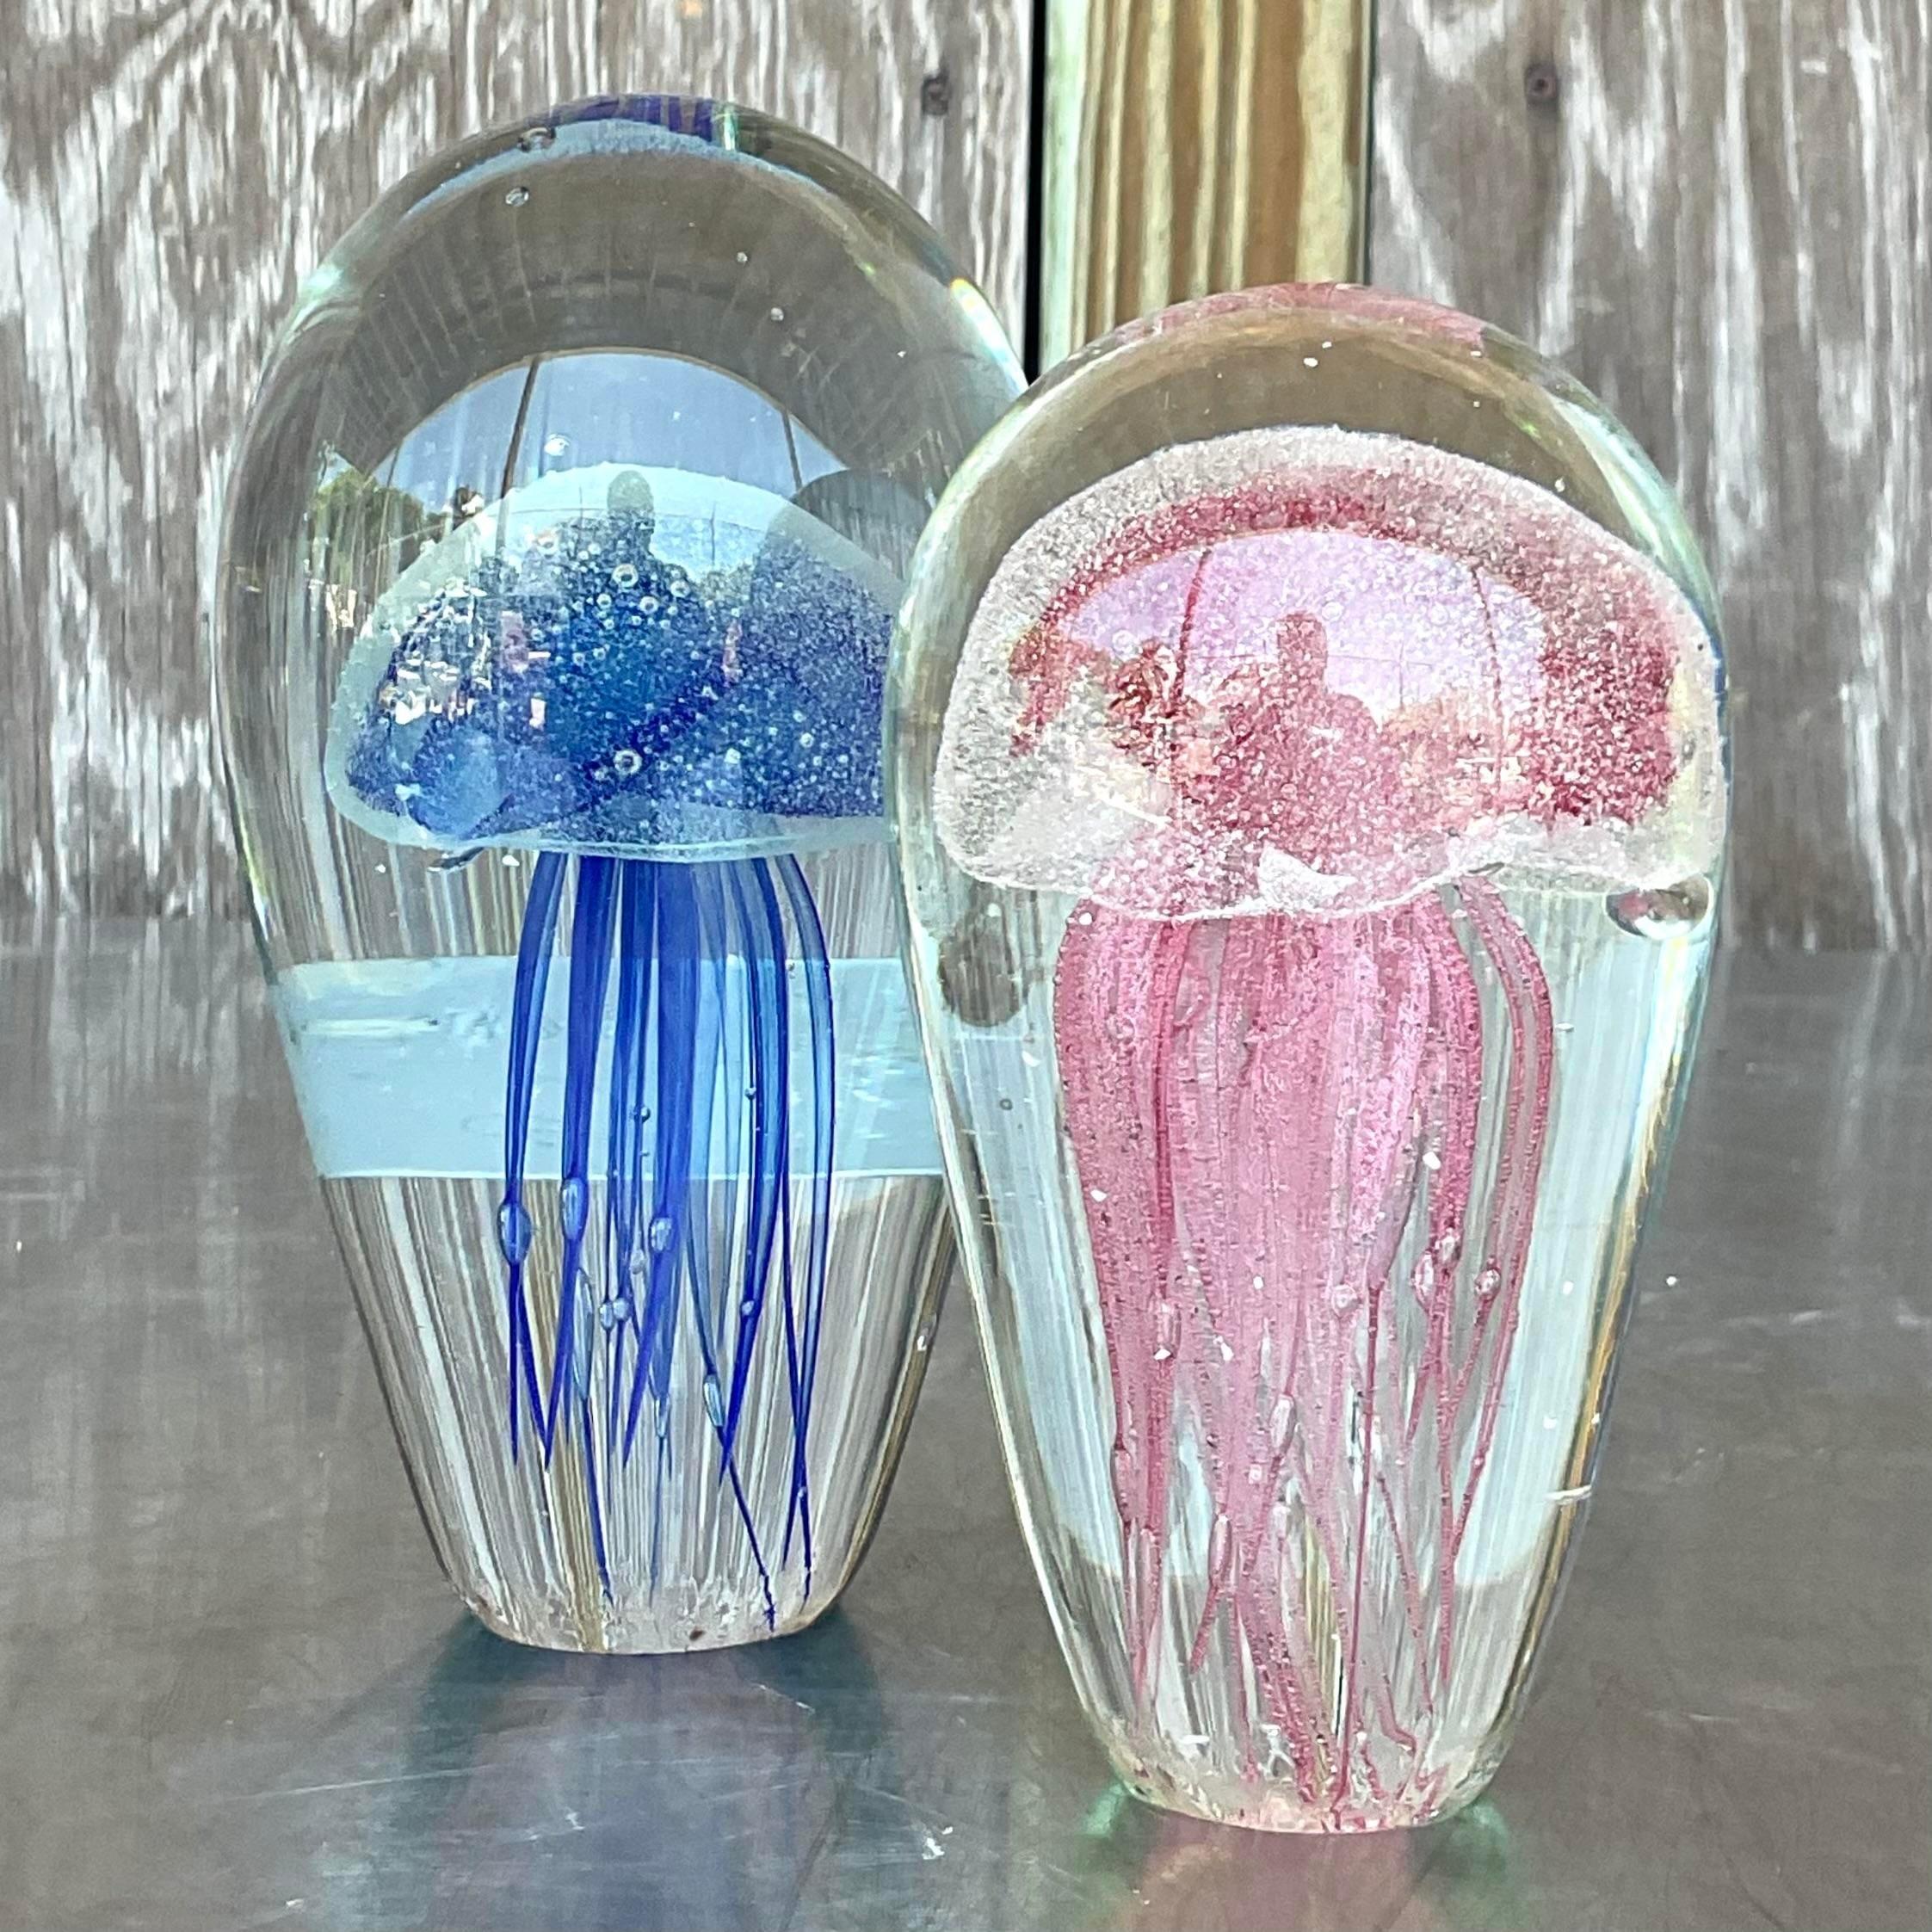 20th Century Vintage Boho Italian Glass Jellyfish After Murano - Set of 2 For Sale